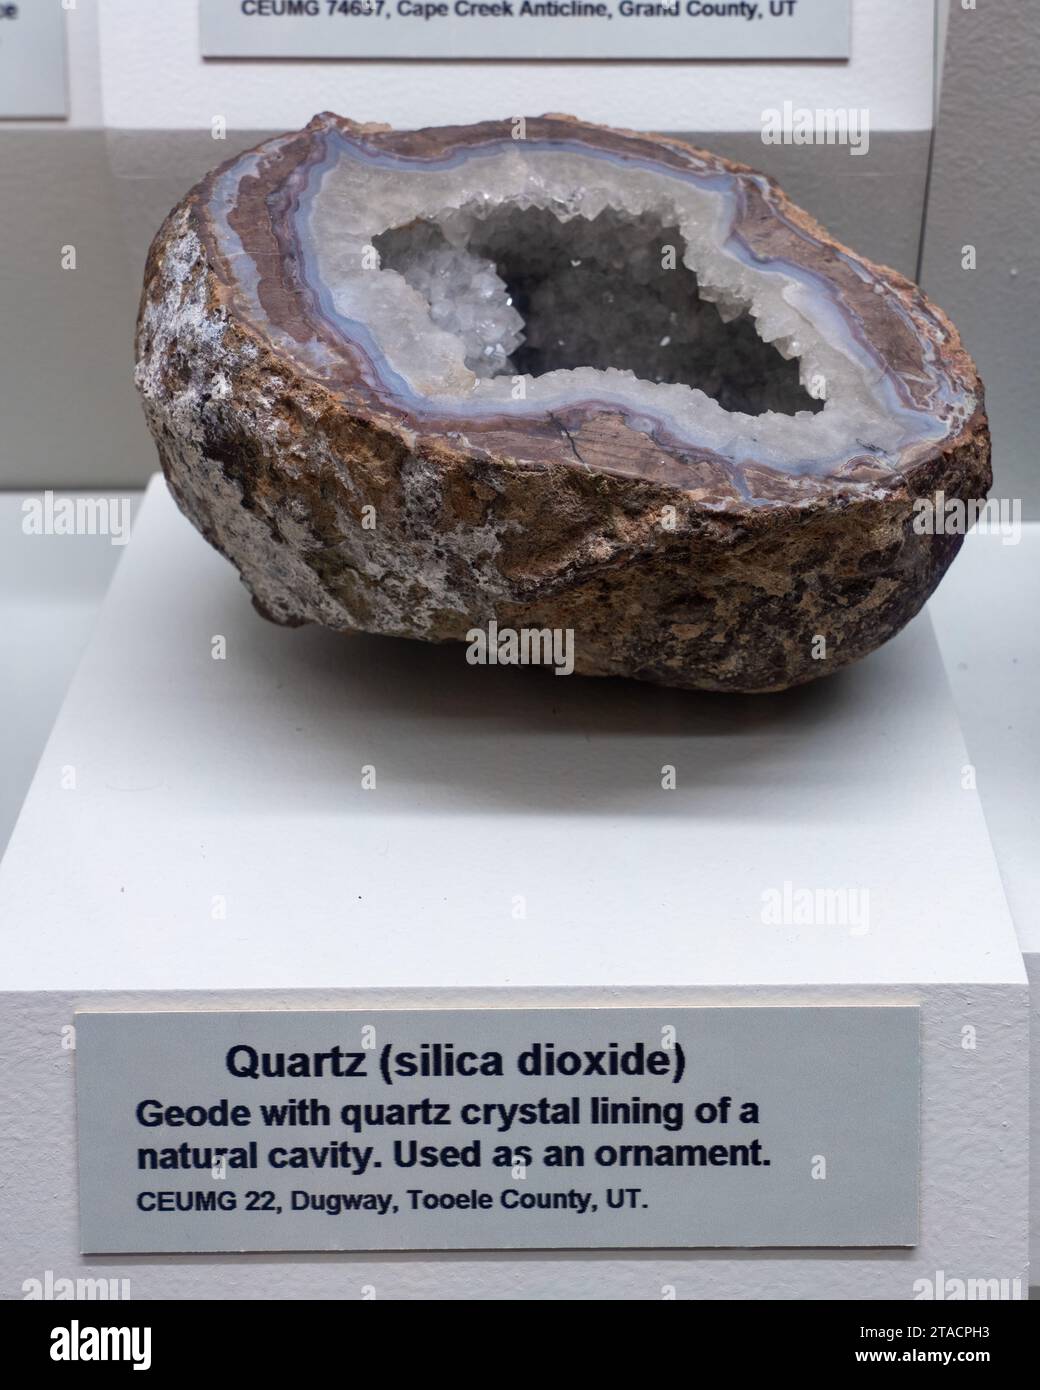 Geode with quartz cystal lining in the mineral collection in the USU Eastern Prehistoric Museum, Price, Utah. Stock Photo